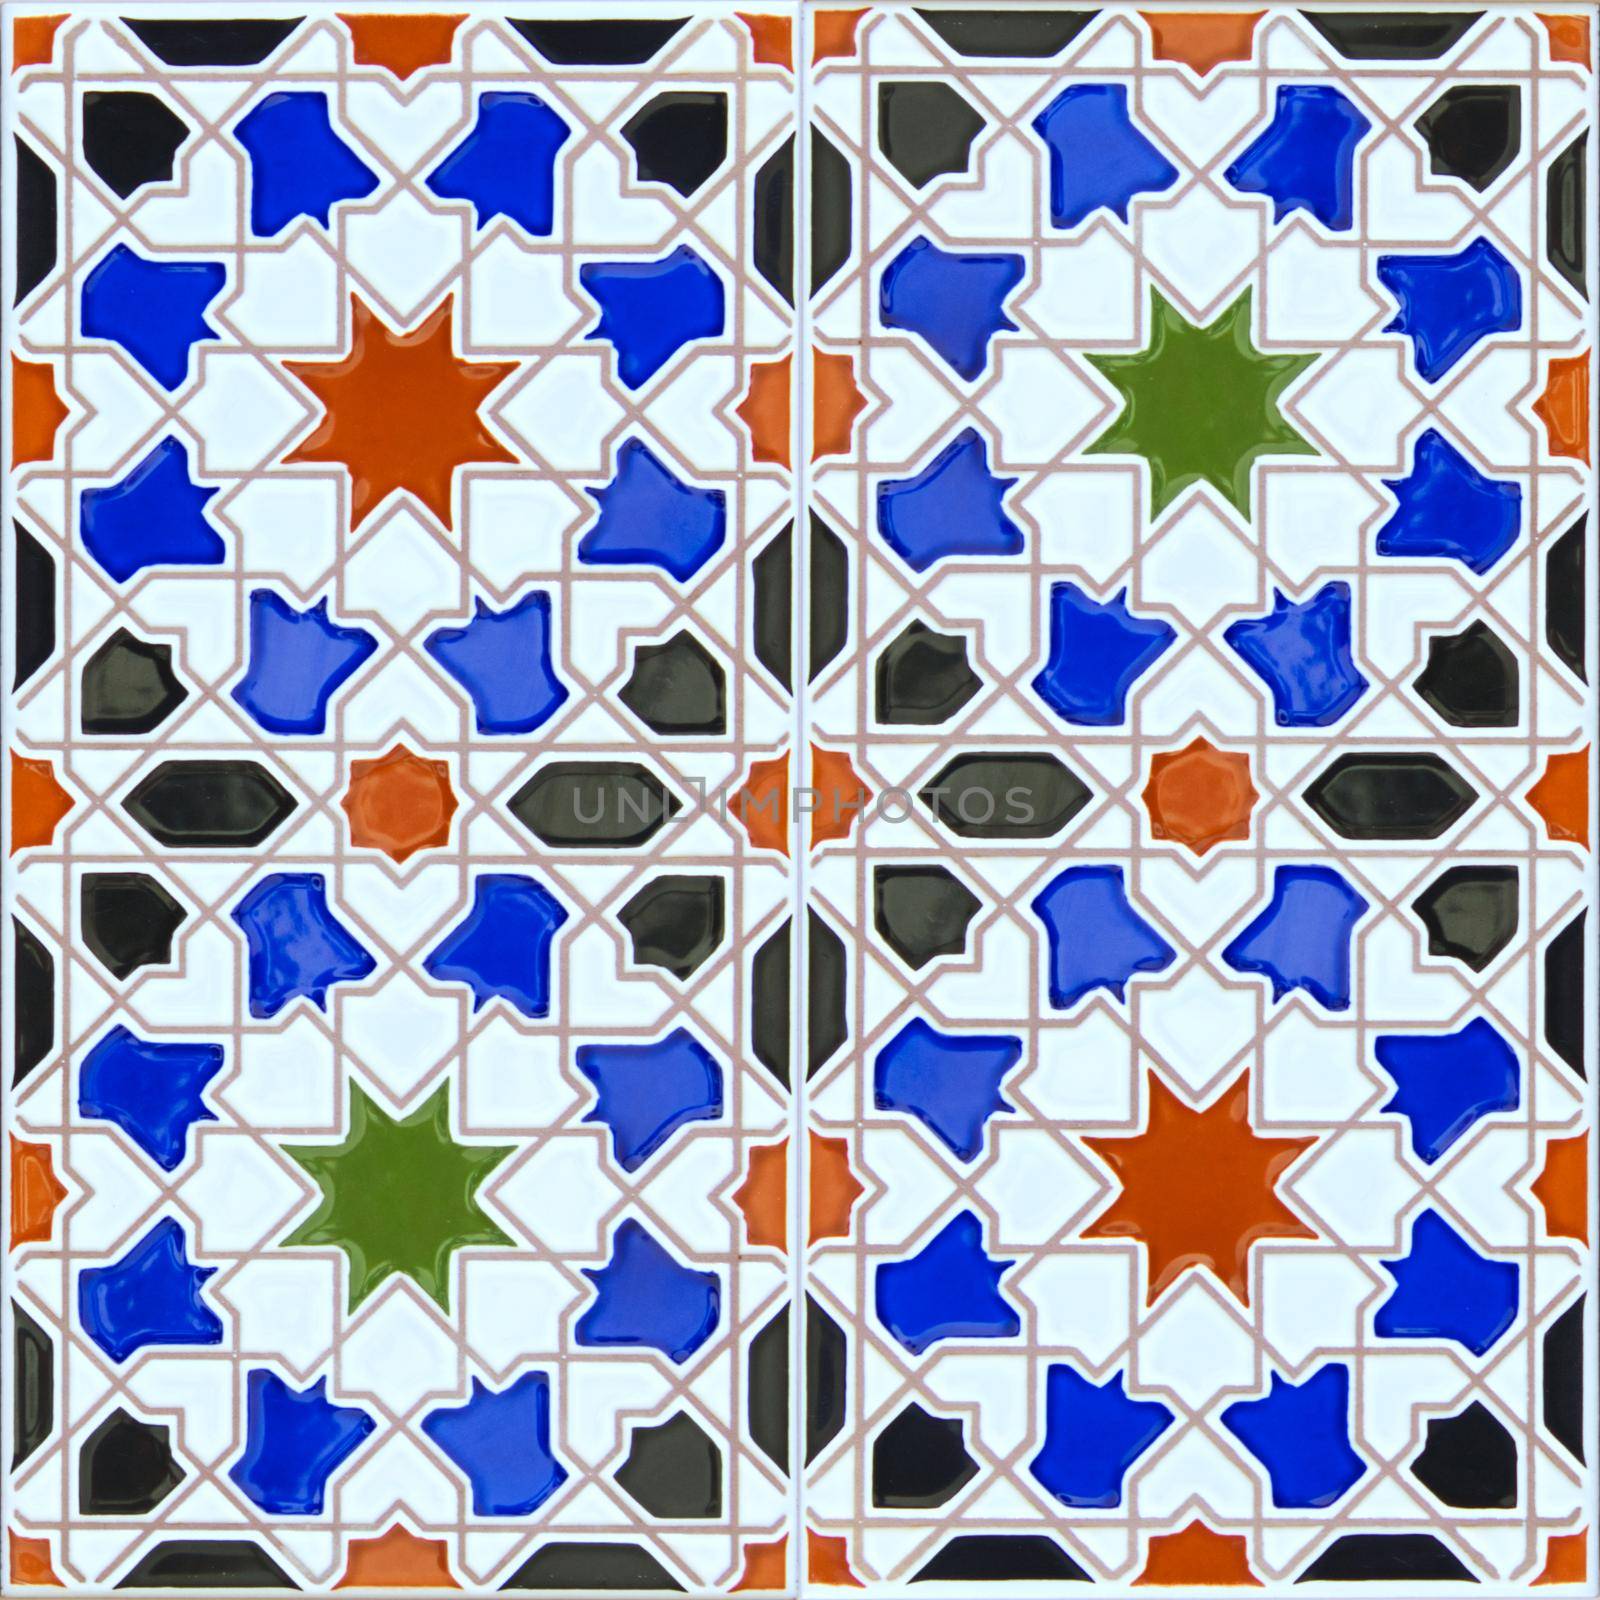 Seamless ceramic tile in the Spanish Andalusian style suitable for a background pattern